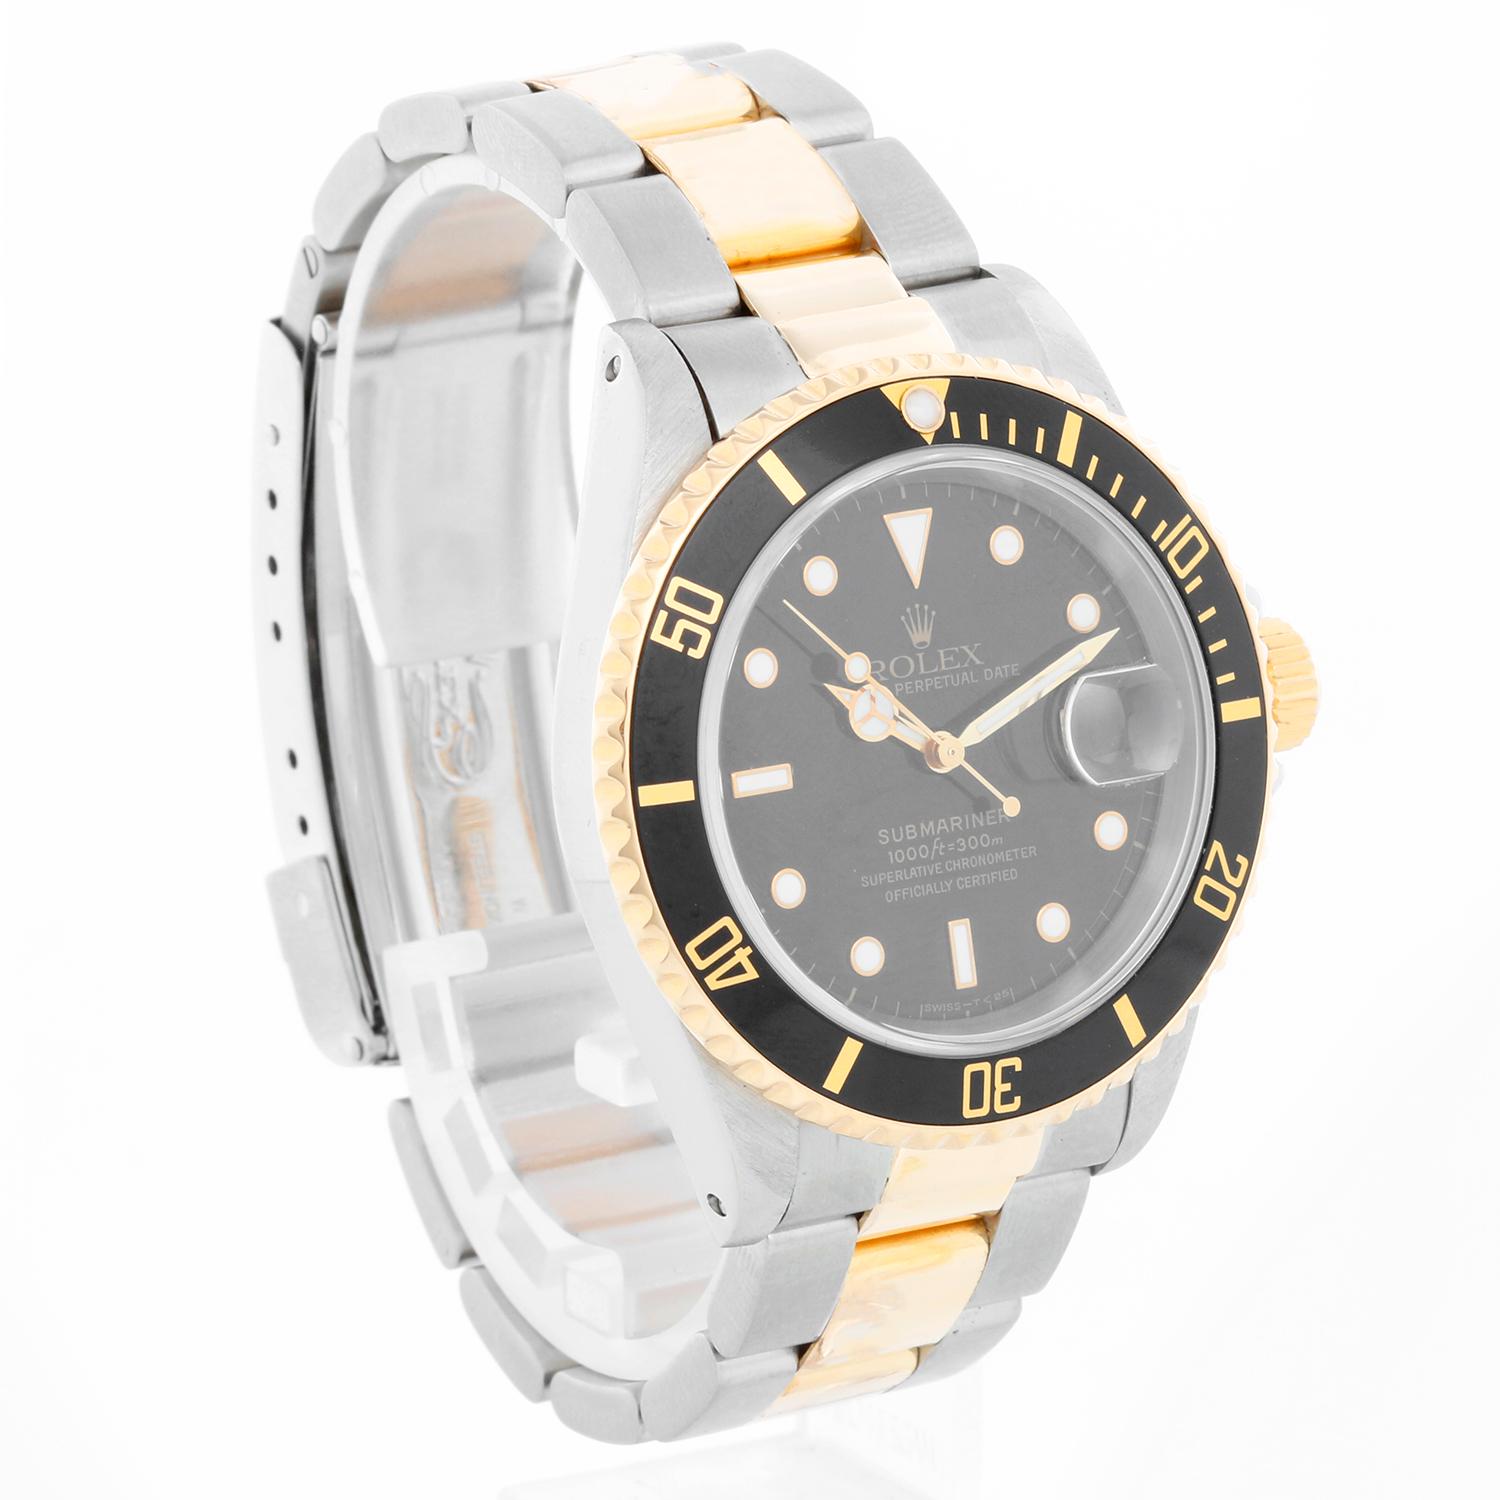 Rolex Submariner 2-Tone Steel & Gold Men's Watch 16613 - Automatic winding, 31 jewels. Stainless steel case with 18k yellow gold bezel with black insert (40mm diameter). Black dial with hour markers; date at 3 o'clock. Stainless steel and 18k yellow